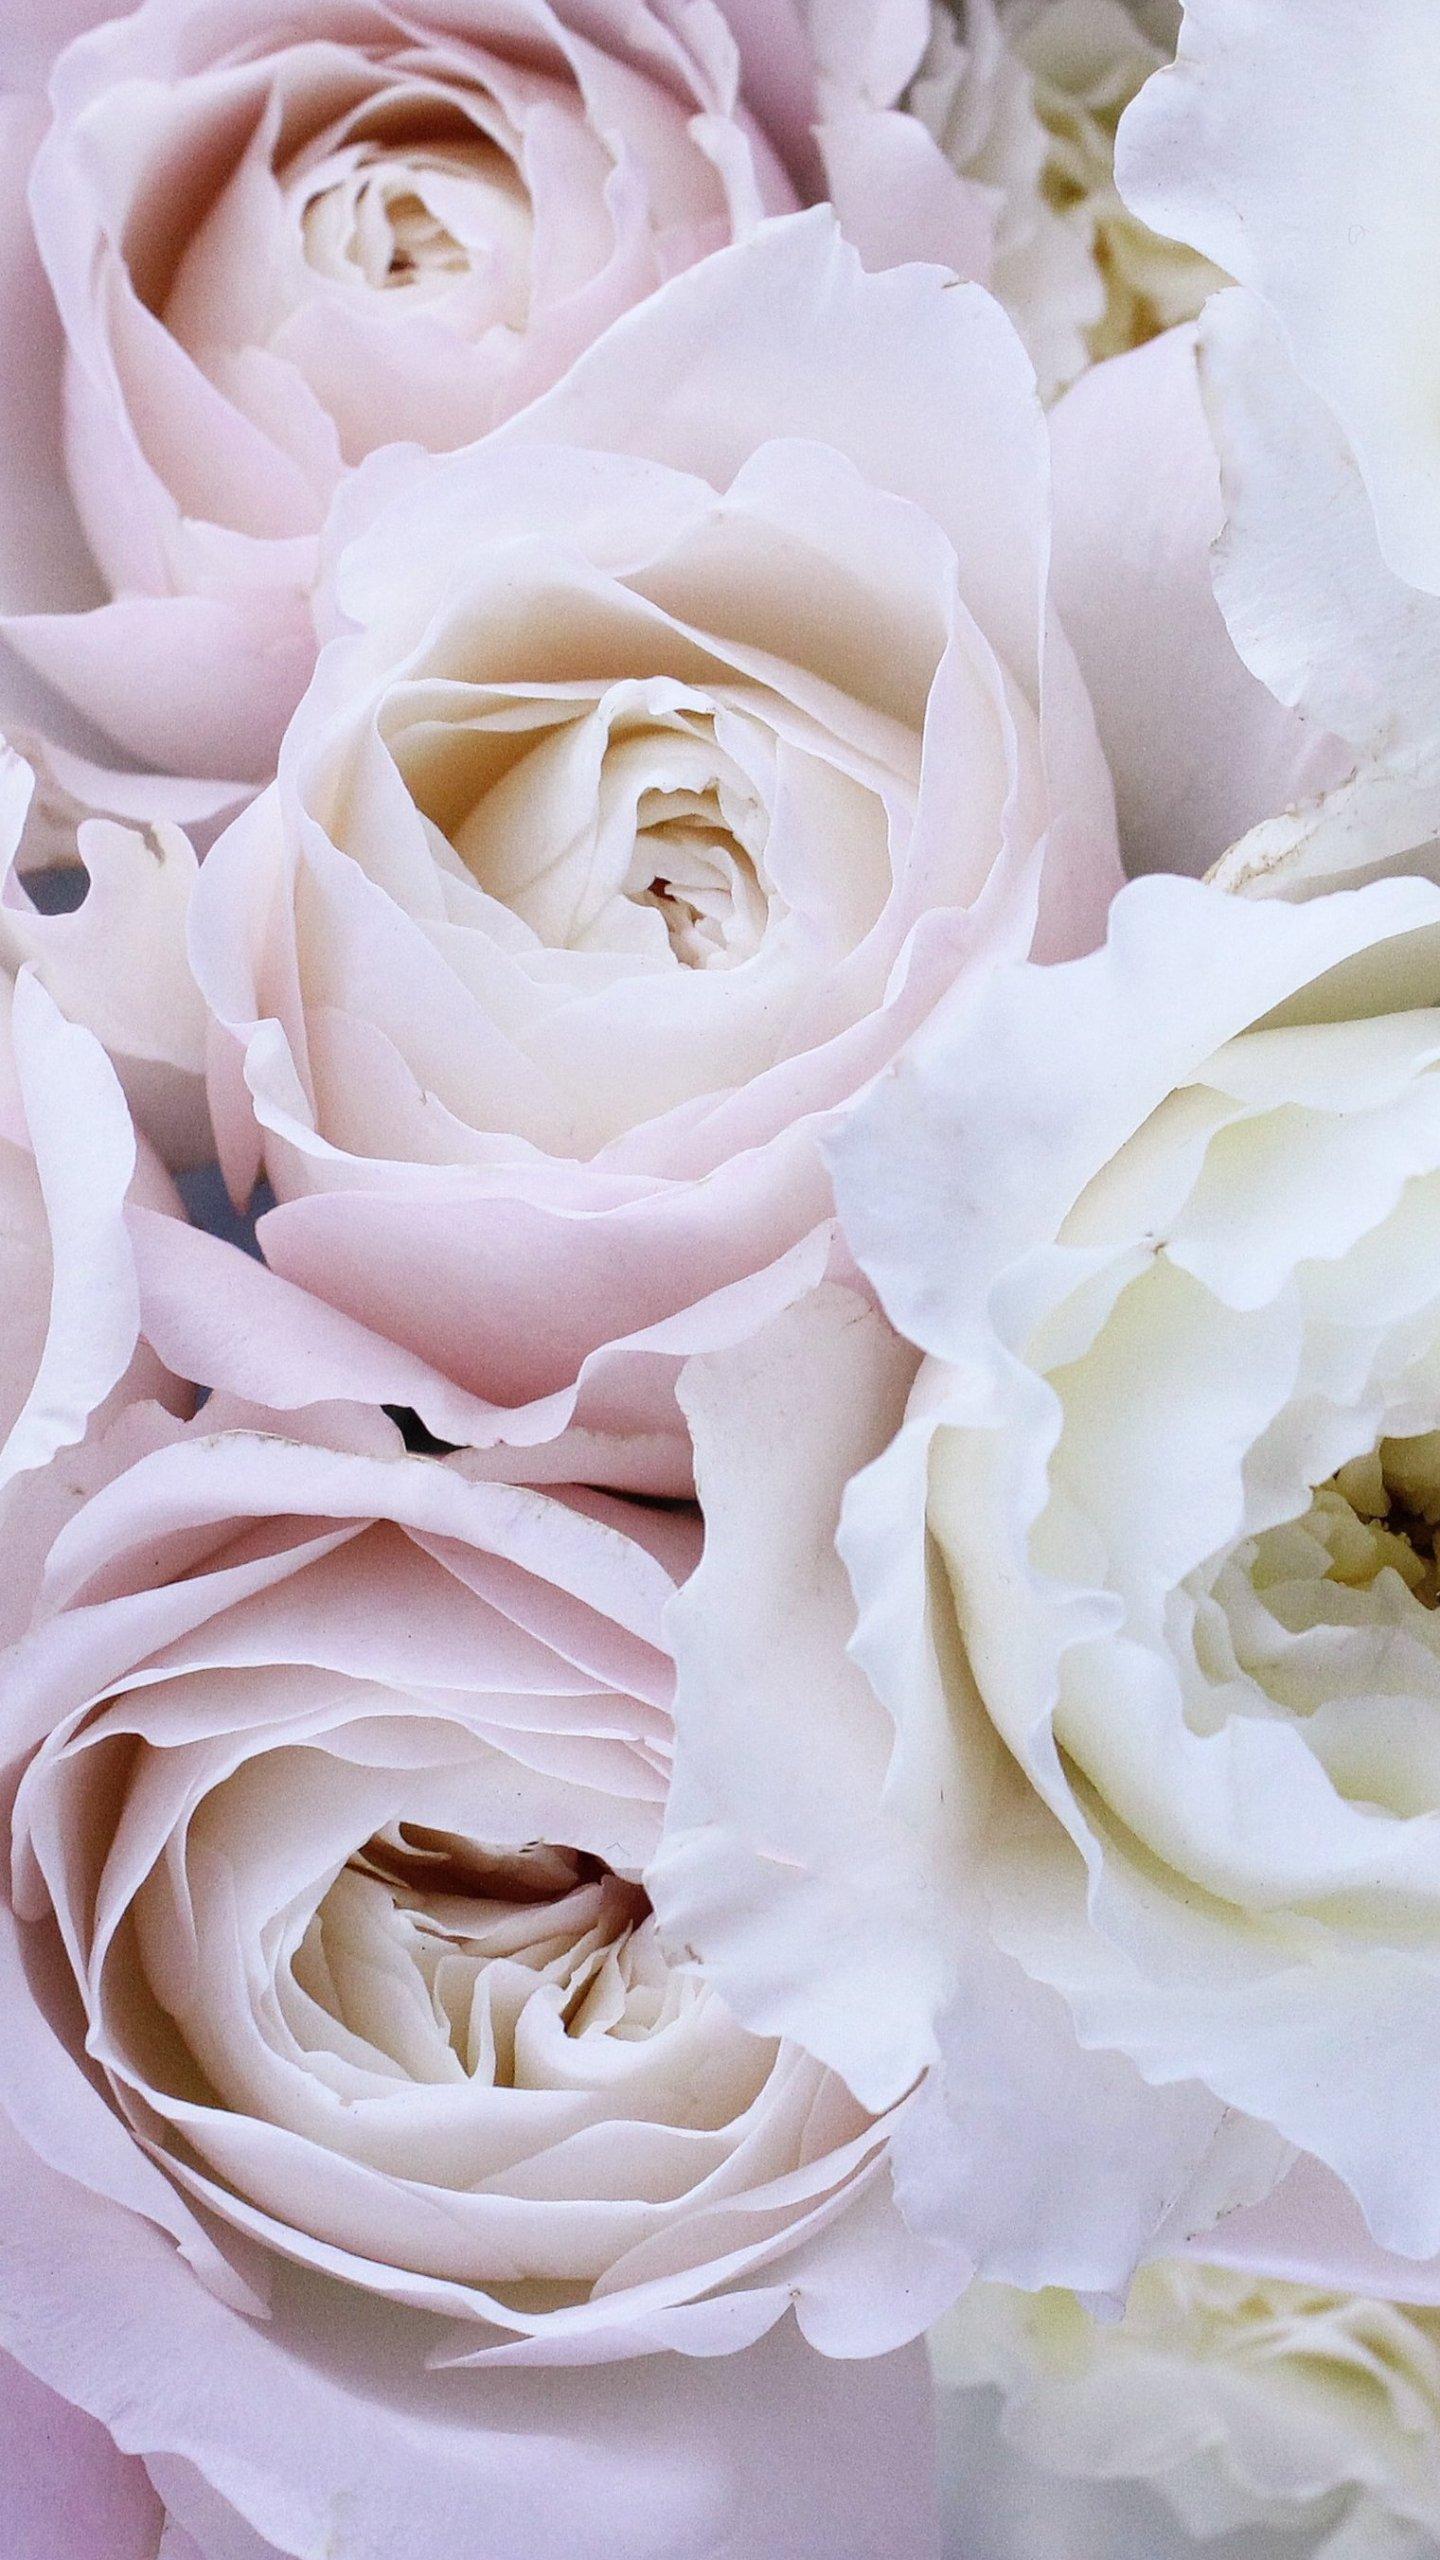 Pale Pink and White Roses Wallpaper, Android & Desktop